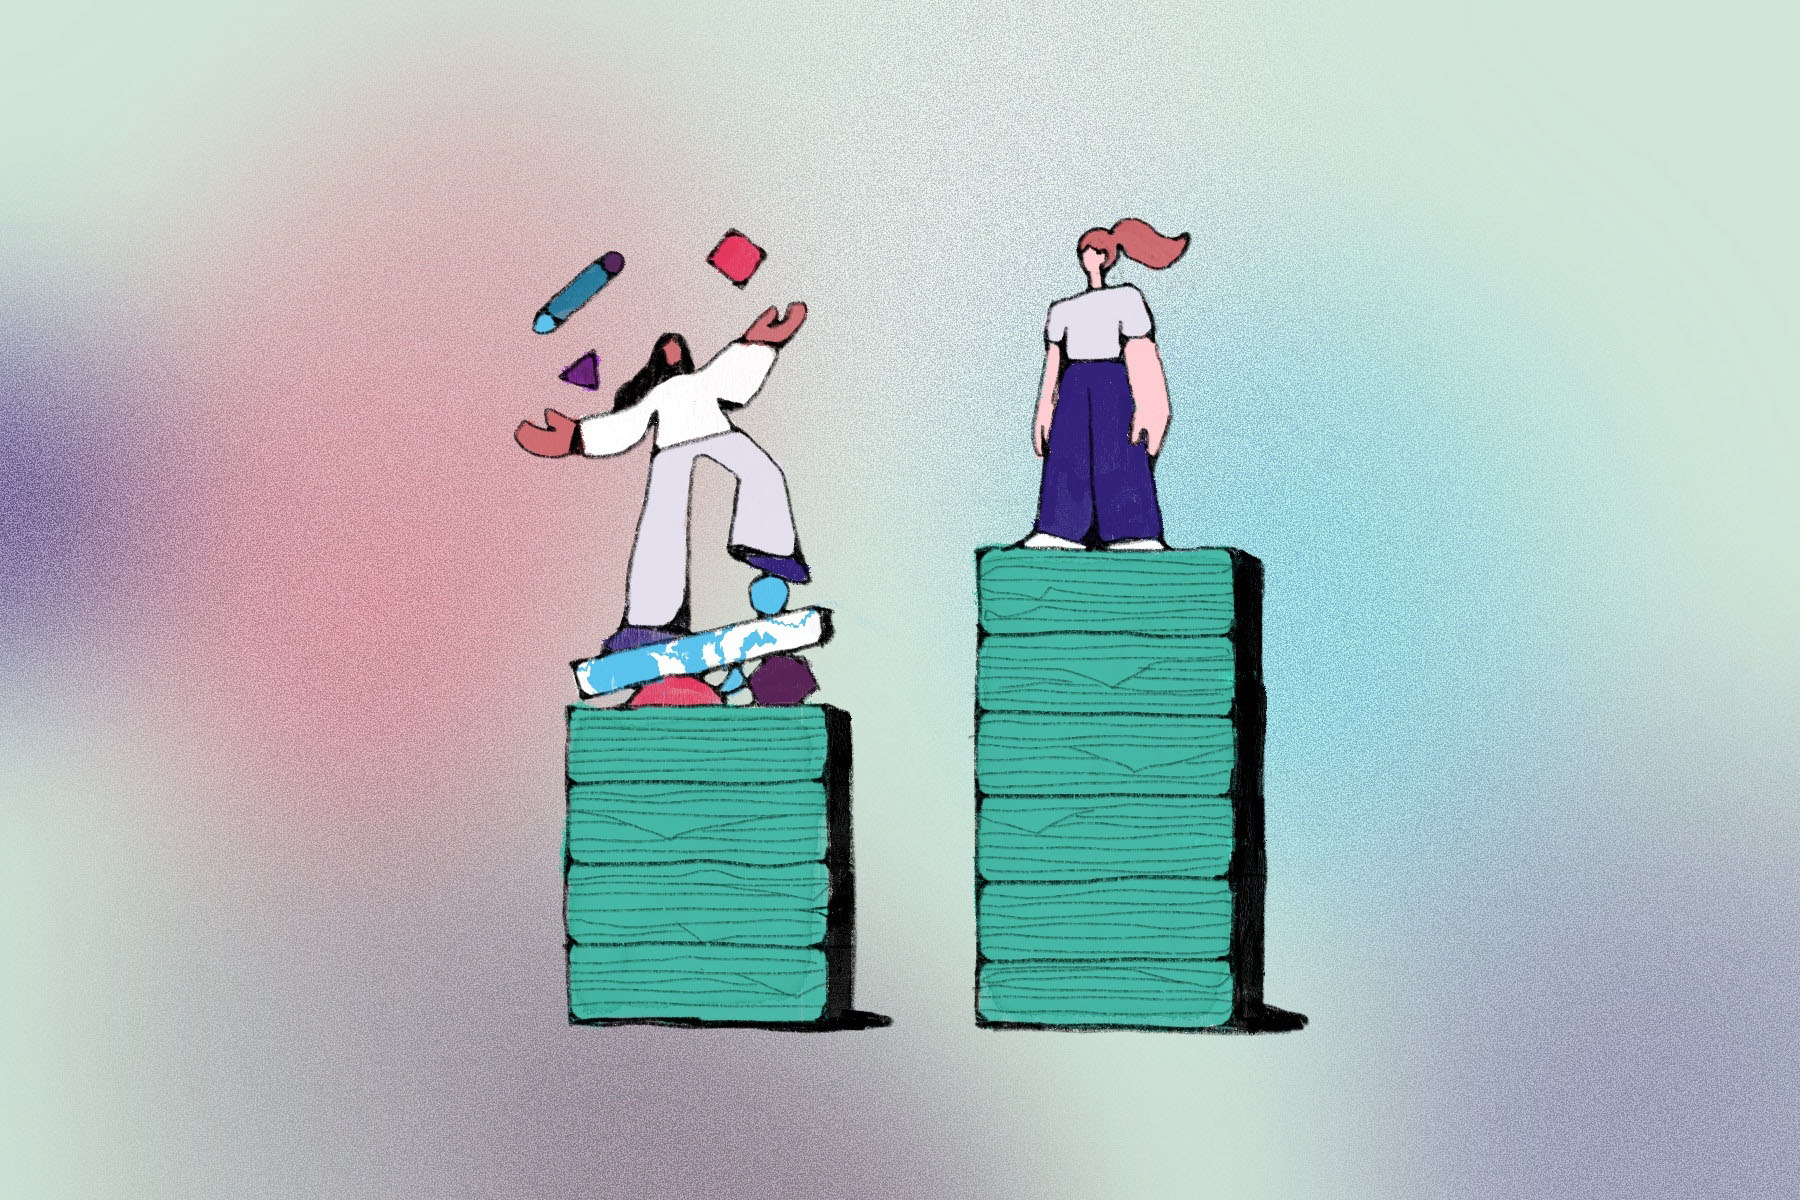 Illustration of two women, one juggling different shape and one standing on stacks of different heights.